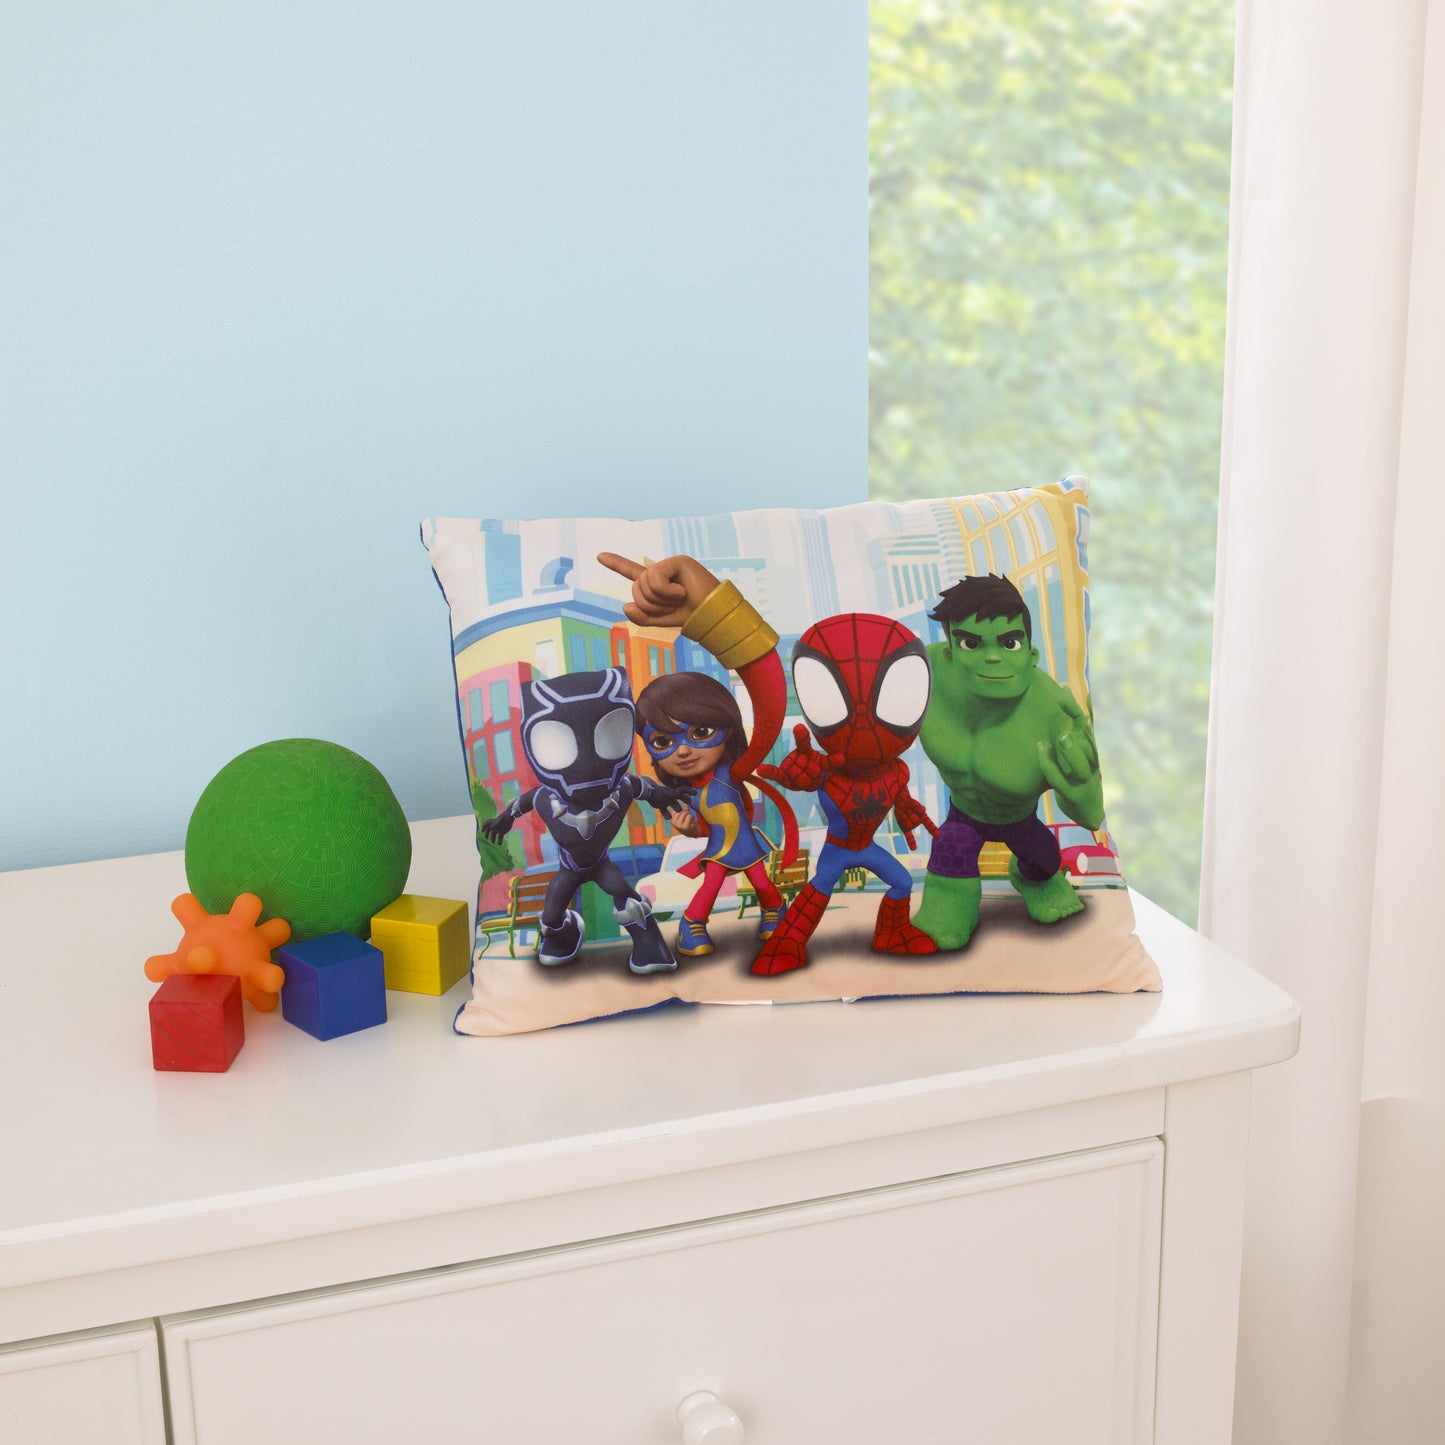 Marvel Spidey and His Amazing Friends Blue, Red, Yellow, and Green, Team Up Decorative Toddler Pillow